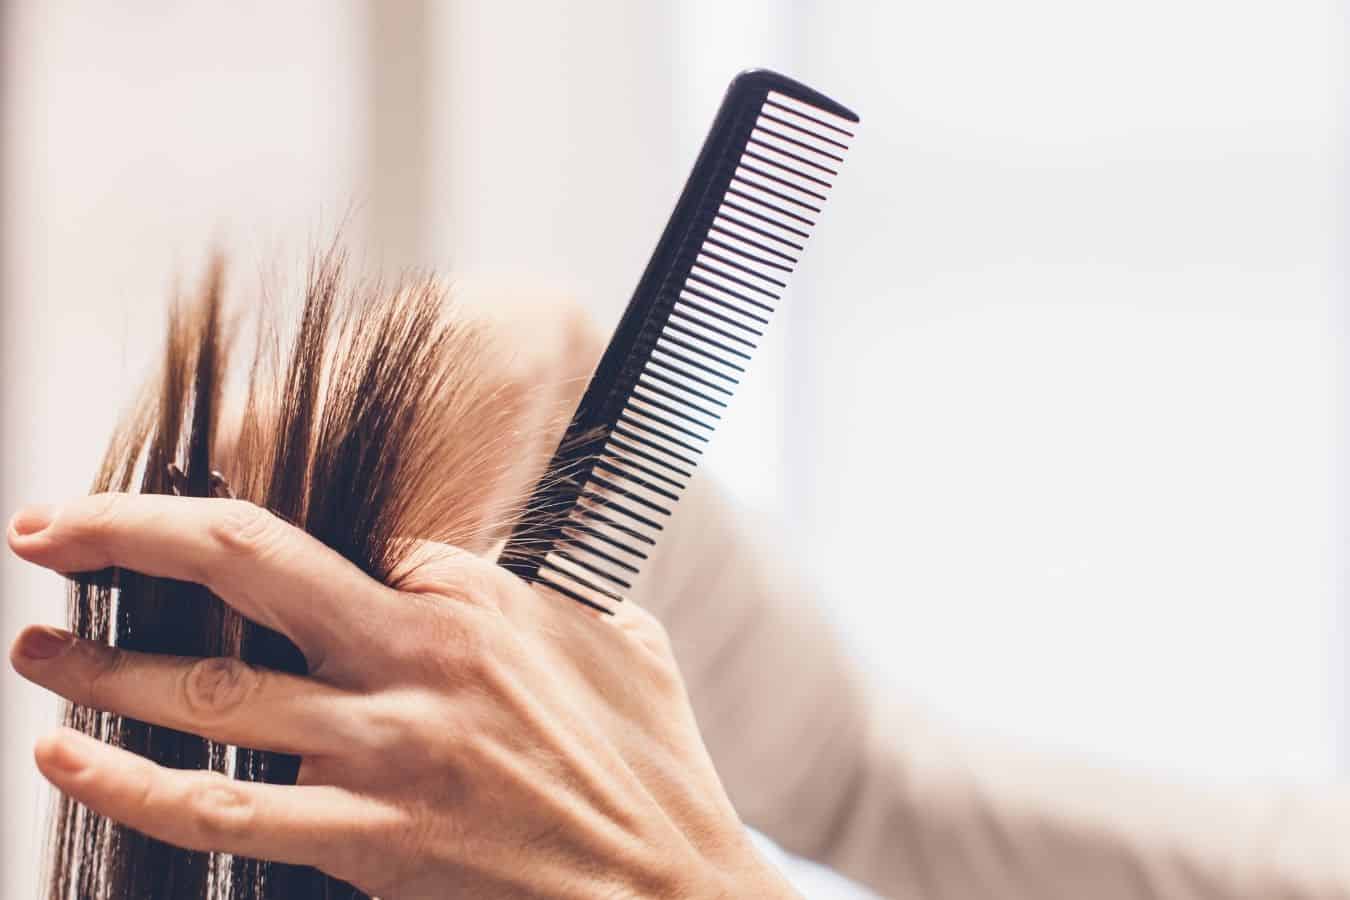 How Short Should You Cut Hair To Get Rid Of Lice